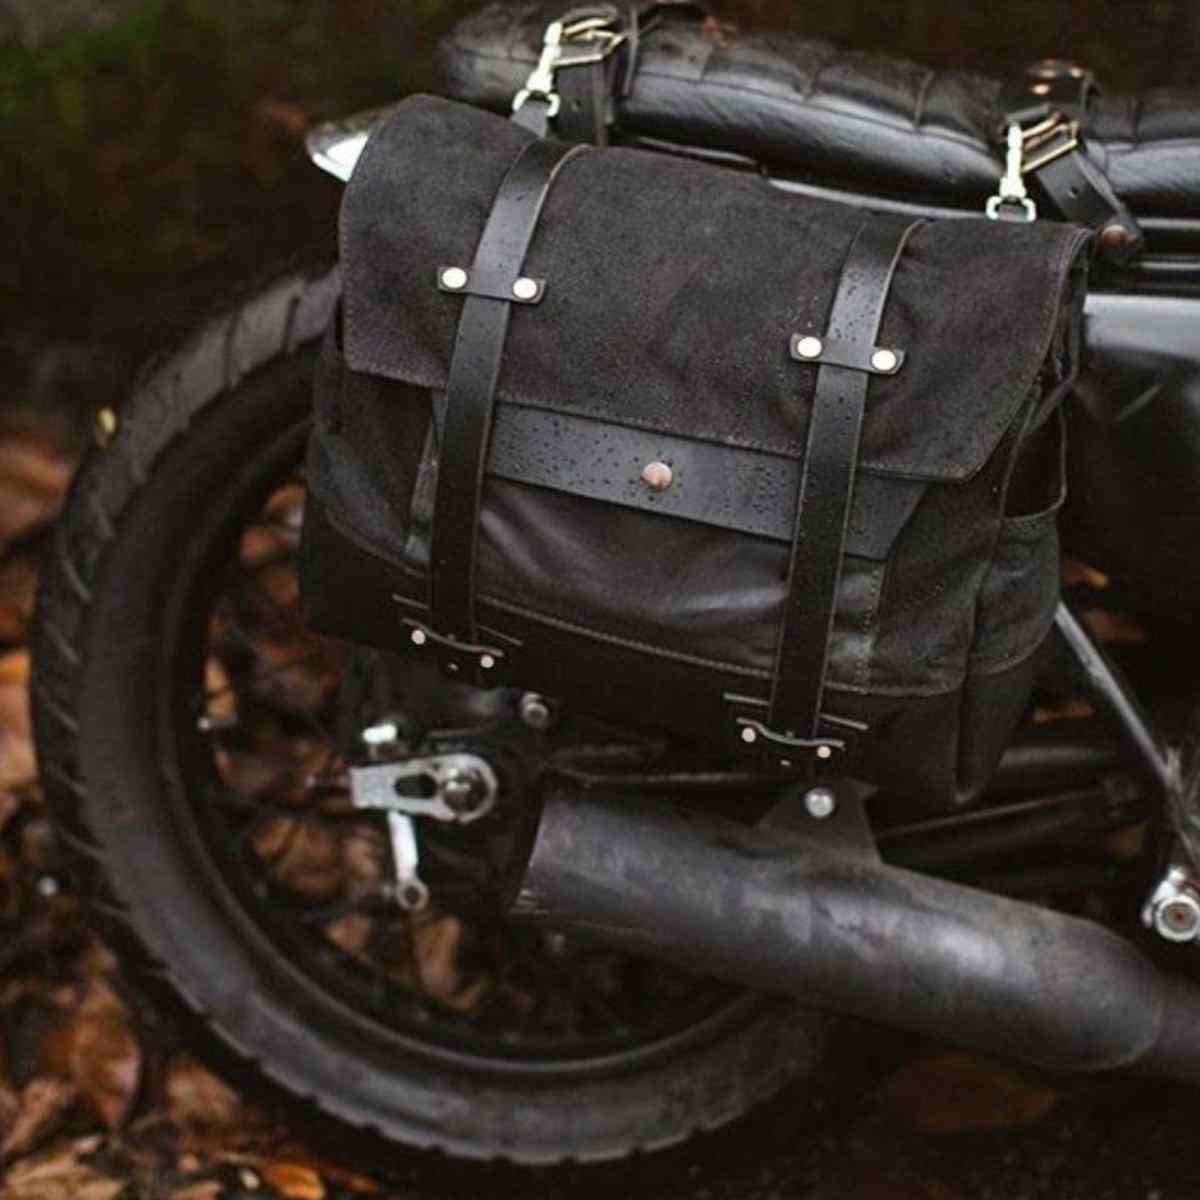 Black Vintage Motorcycle Bag Attached to Motorcycle